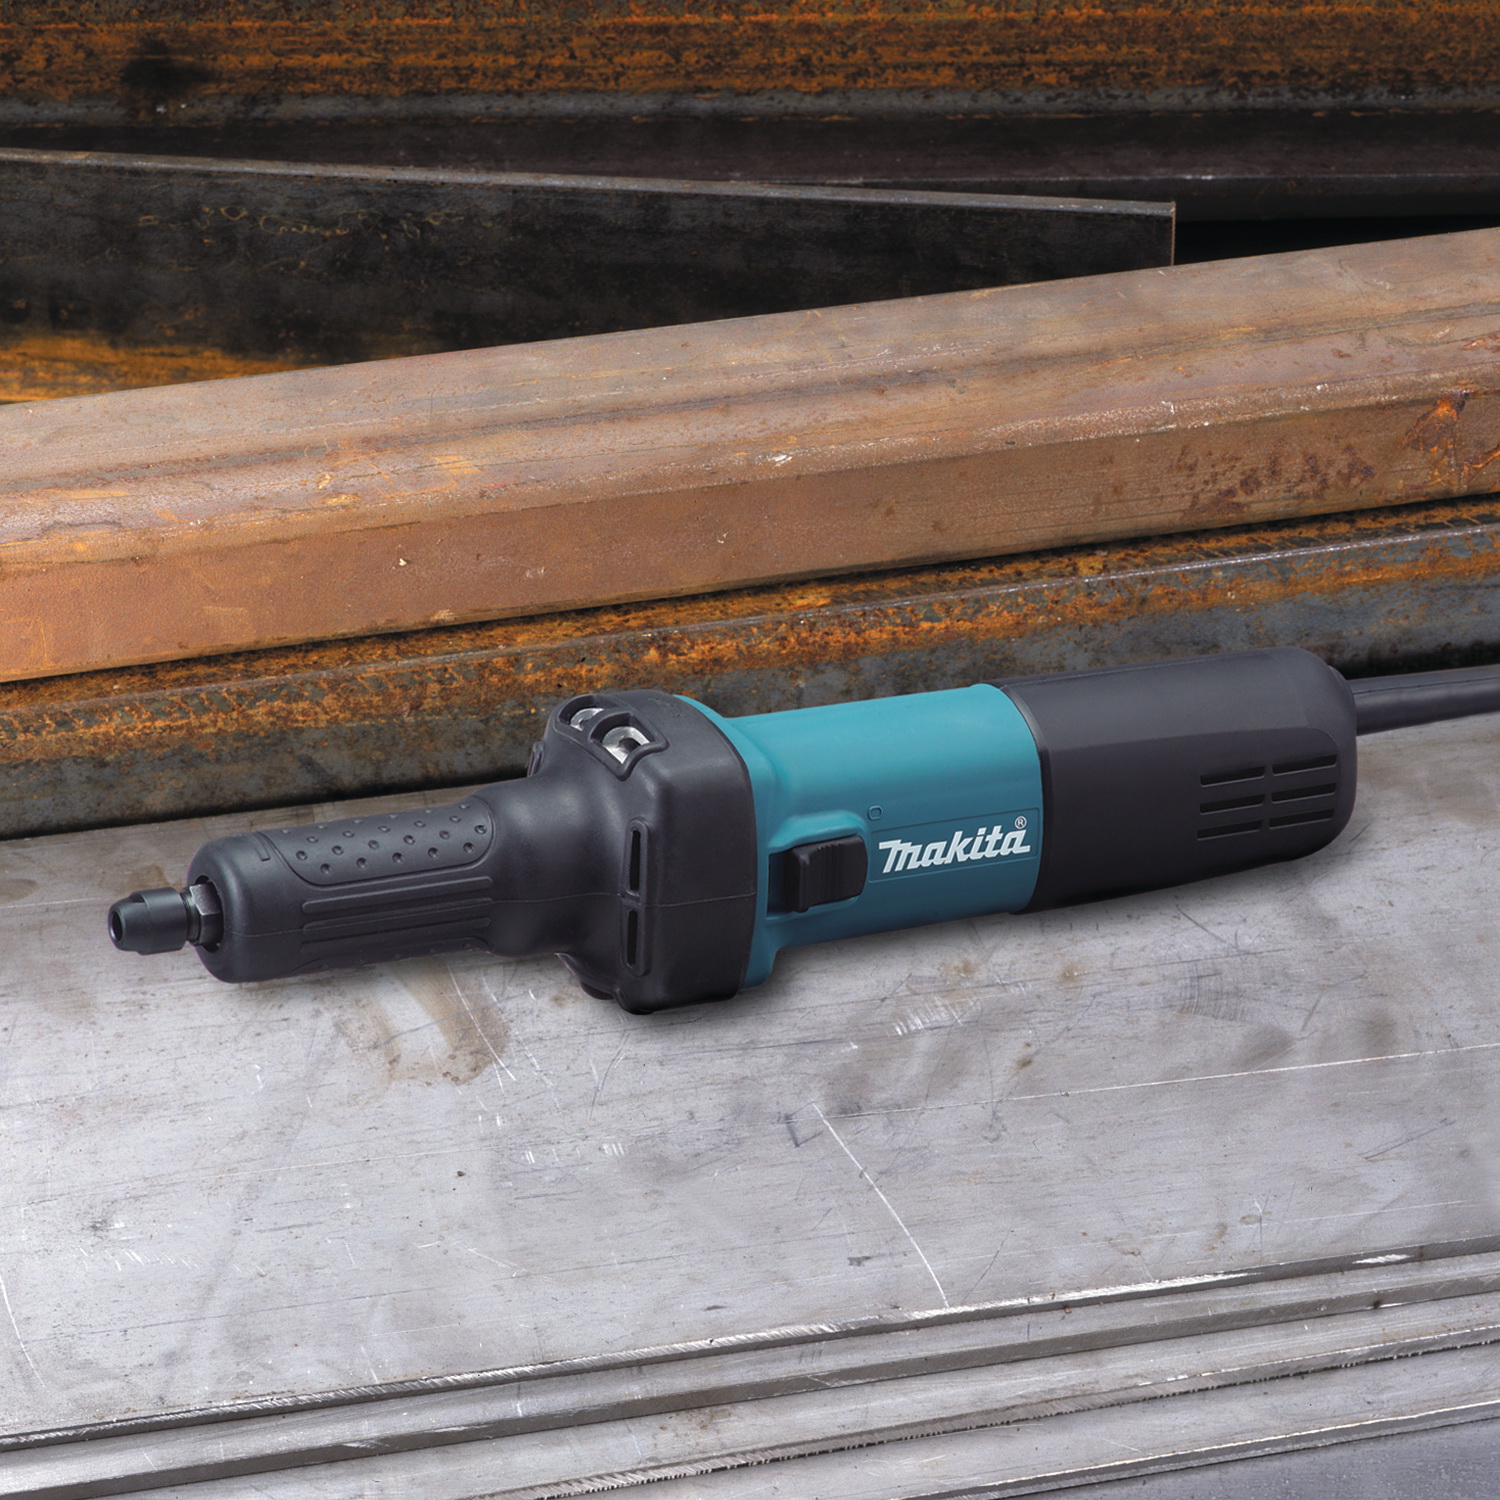 Makita GD0601 Corded Die Grinder with AC/DC Switch, 110 V, 3.5 A, 400 W, 1-1/2 in Dia Wheel, 25,000 rpm Speed - 3